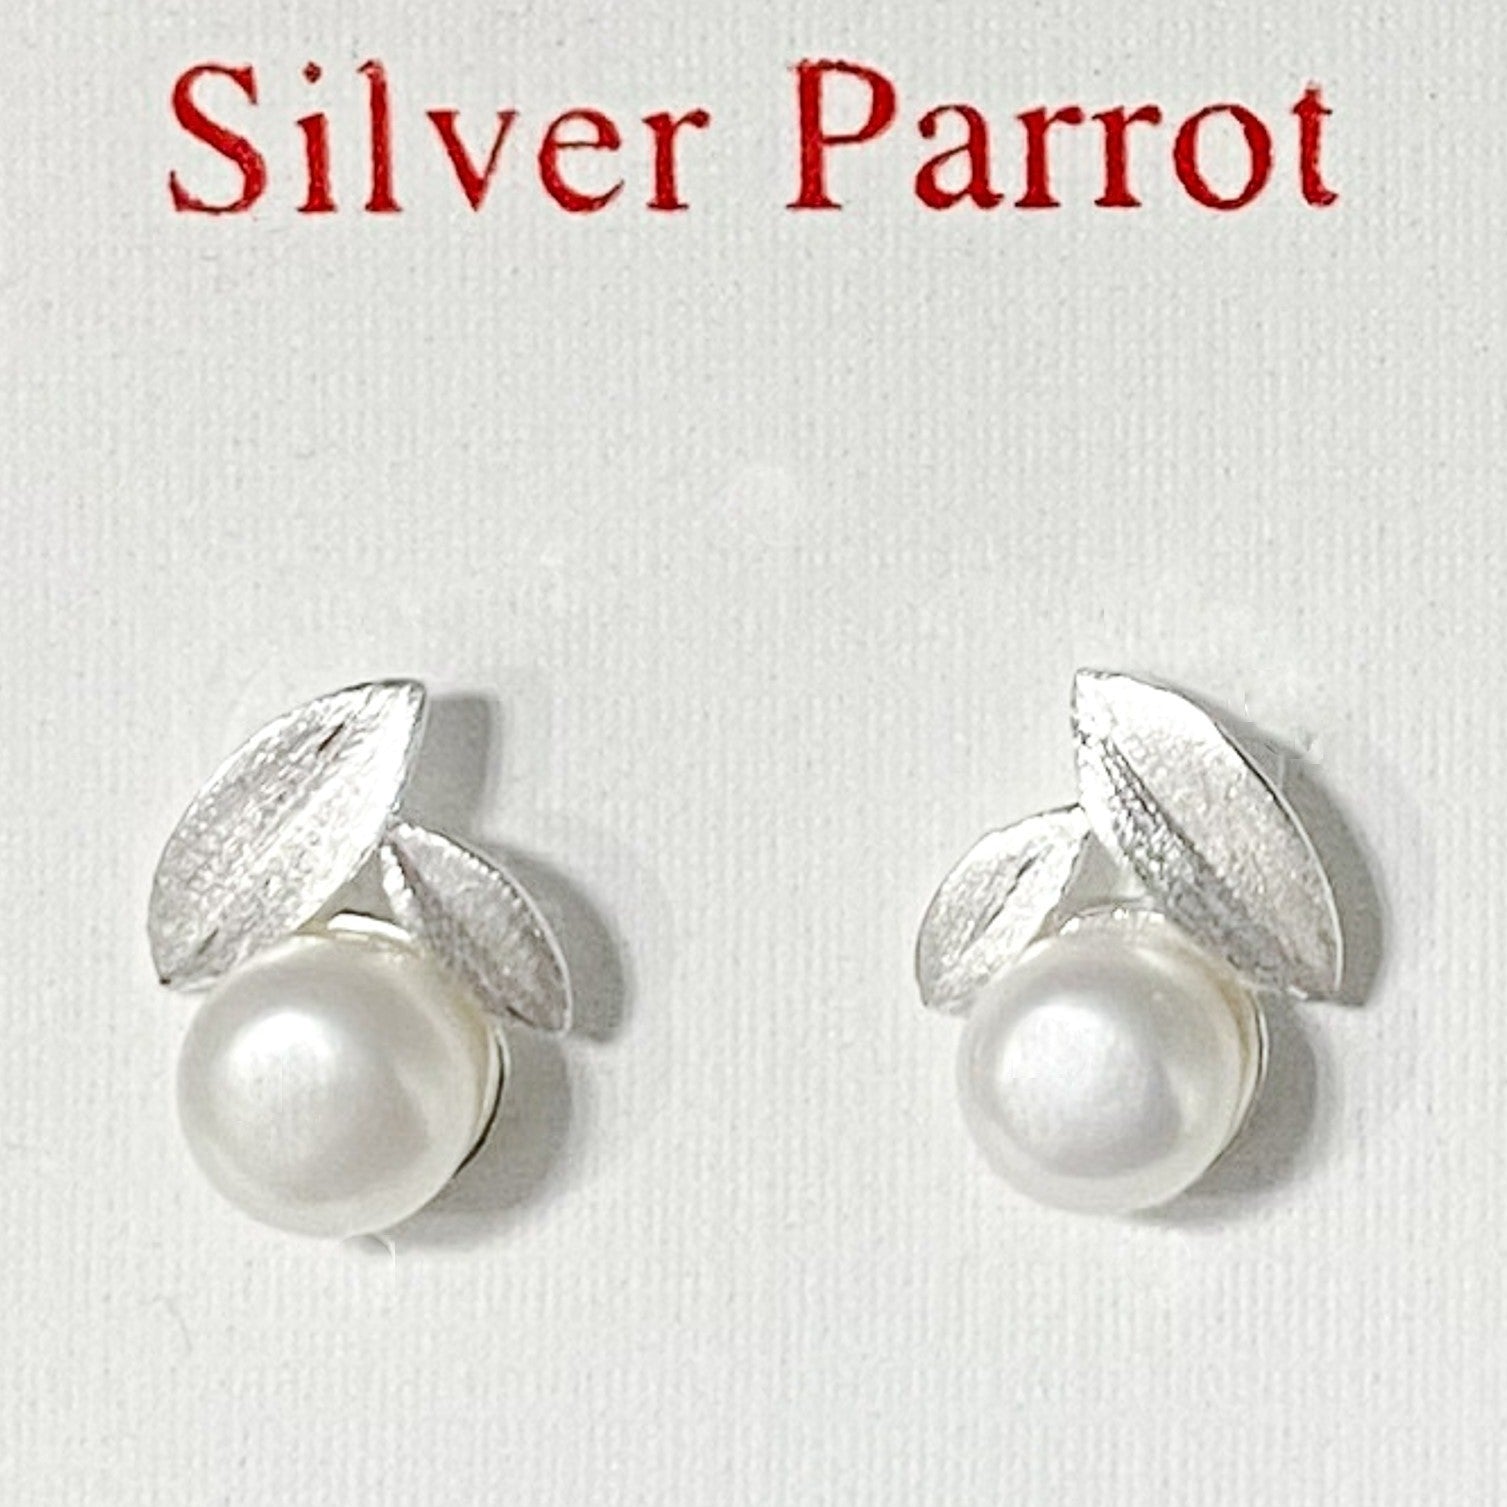 Freshwater white pearl with two small silver leaves on a 925 Sterling Silver post stud